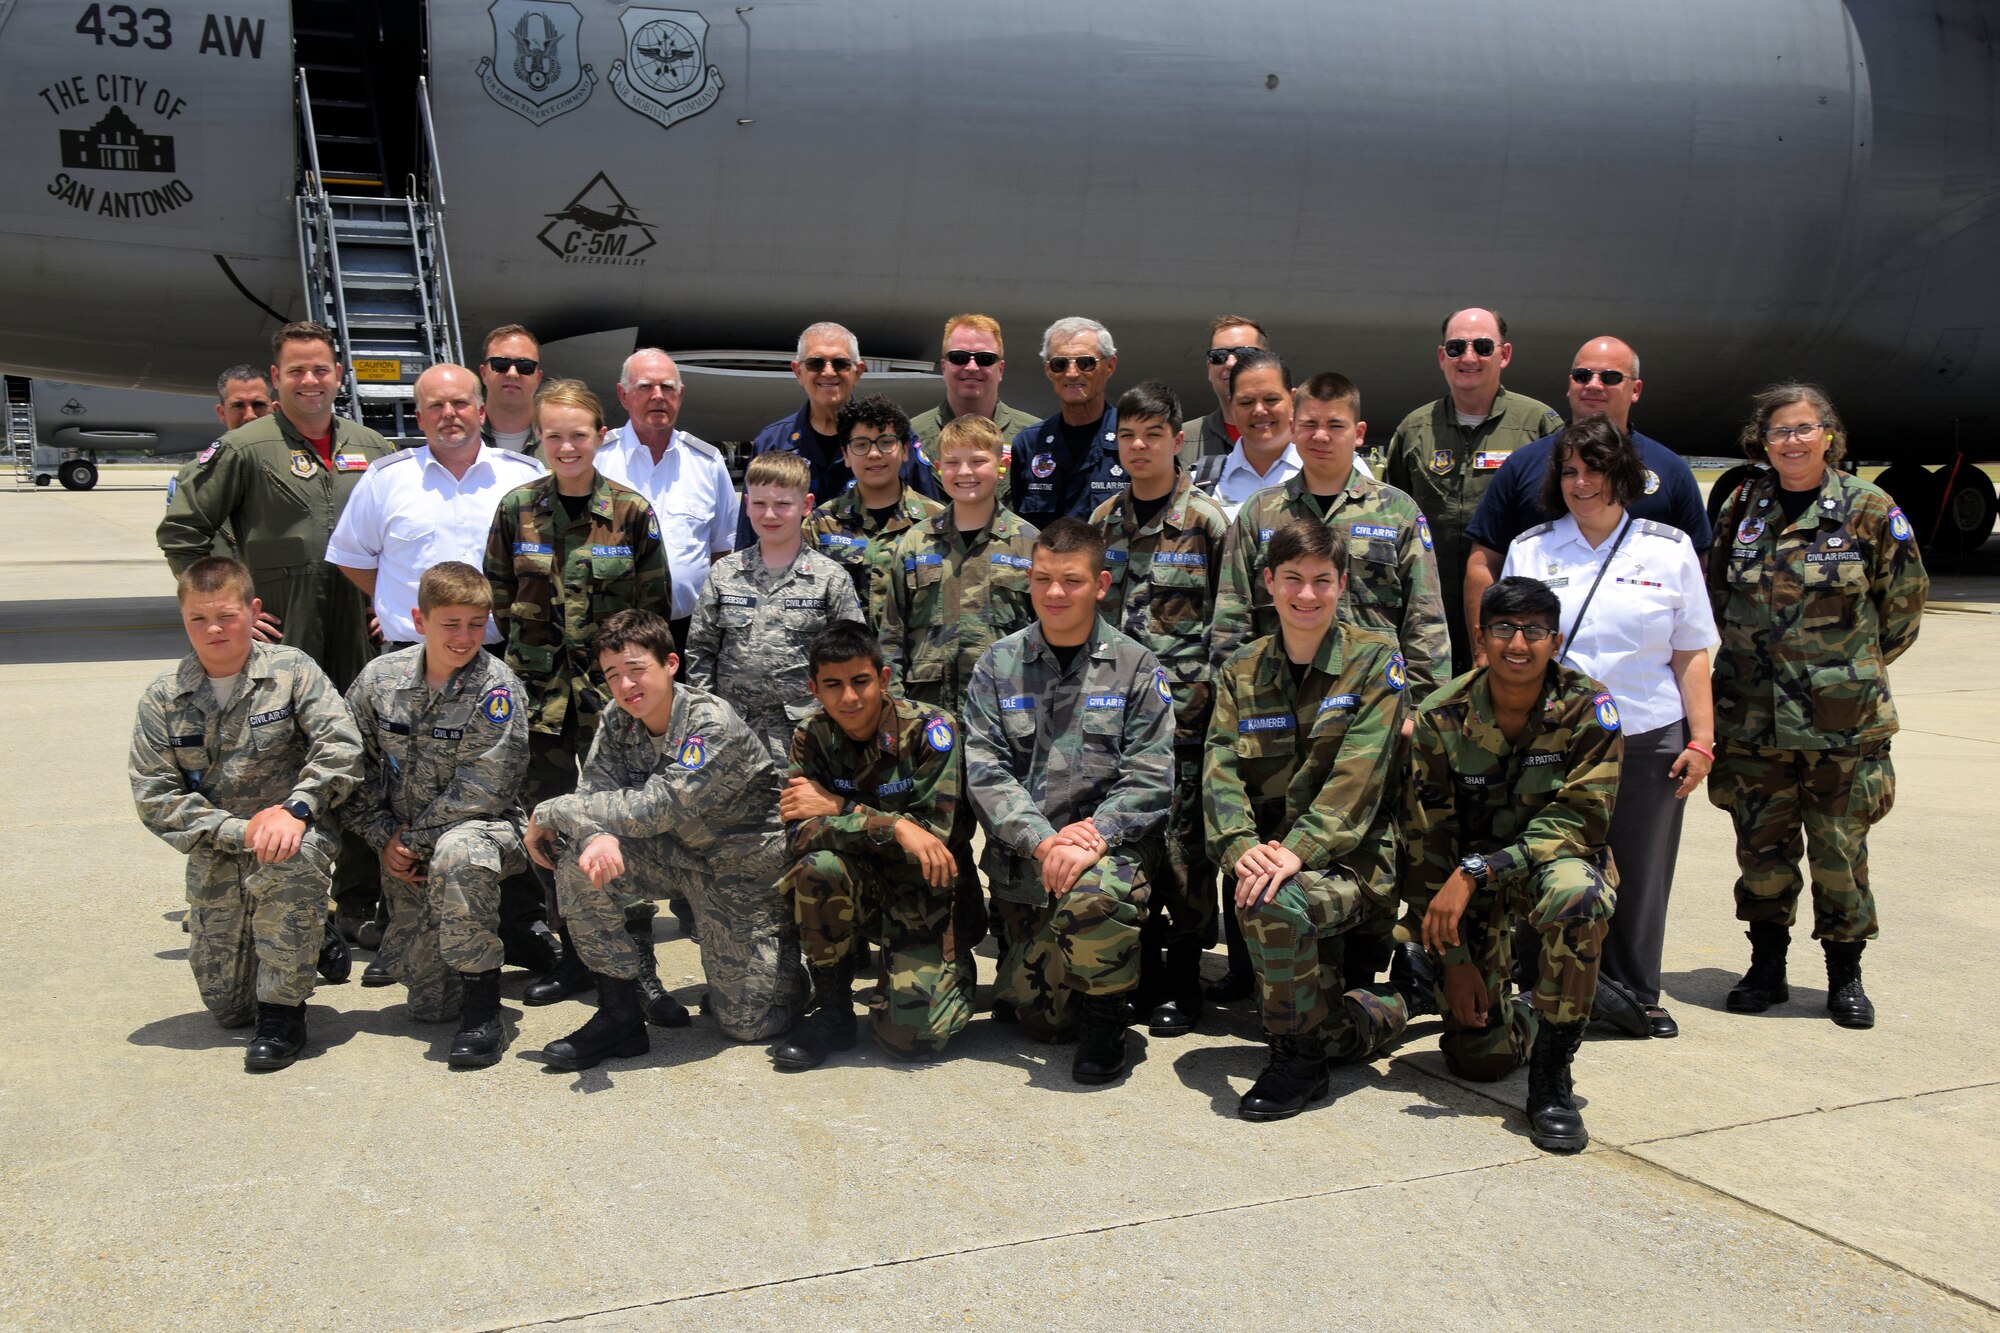 Members of the U.S. Air Force Civil Air Patrol pose with Col. Thomas K. Smith Jr., 433rd Airlift Wing commander, and members of the crew by a C-5M Super Galaxy aircraft after an incentive flight from Joint Base San Antonio-Lackland, Texas, June 8, 2018. As the official Air Force auxiliary, the CAP has approximately 57,000 volunteers and 550 aircraft assigned to more than 1,500 units stateside available or currently supporting non-combat missions on behalf of the Air Force. (U.S. Air Force photo by Staff Sgt. Lauren M. Snyder)